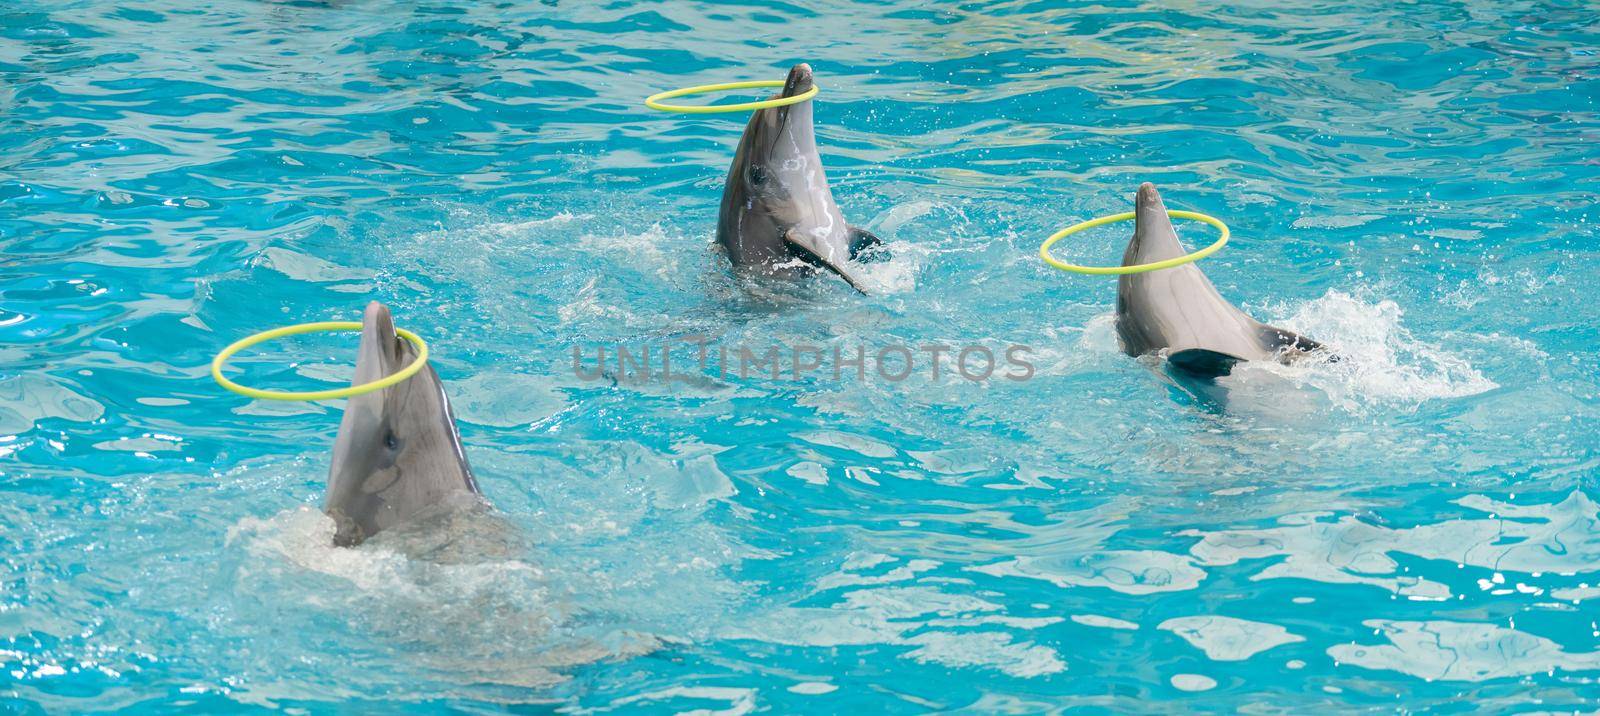 Dolphin spinning hoop in the pool, Dolphins show presentation in blue water in aquarium. by sirawit99